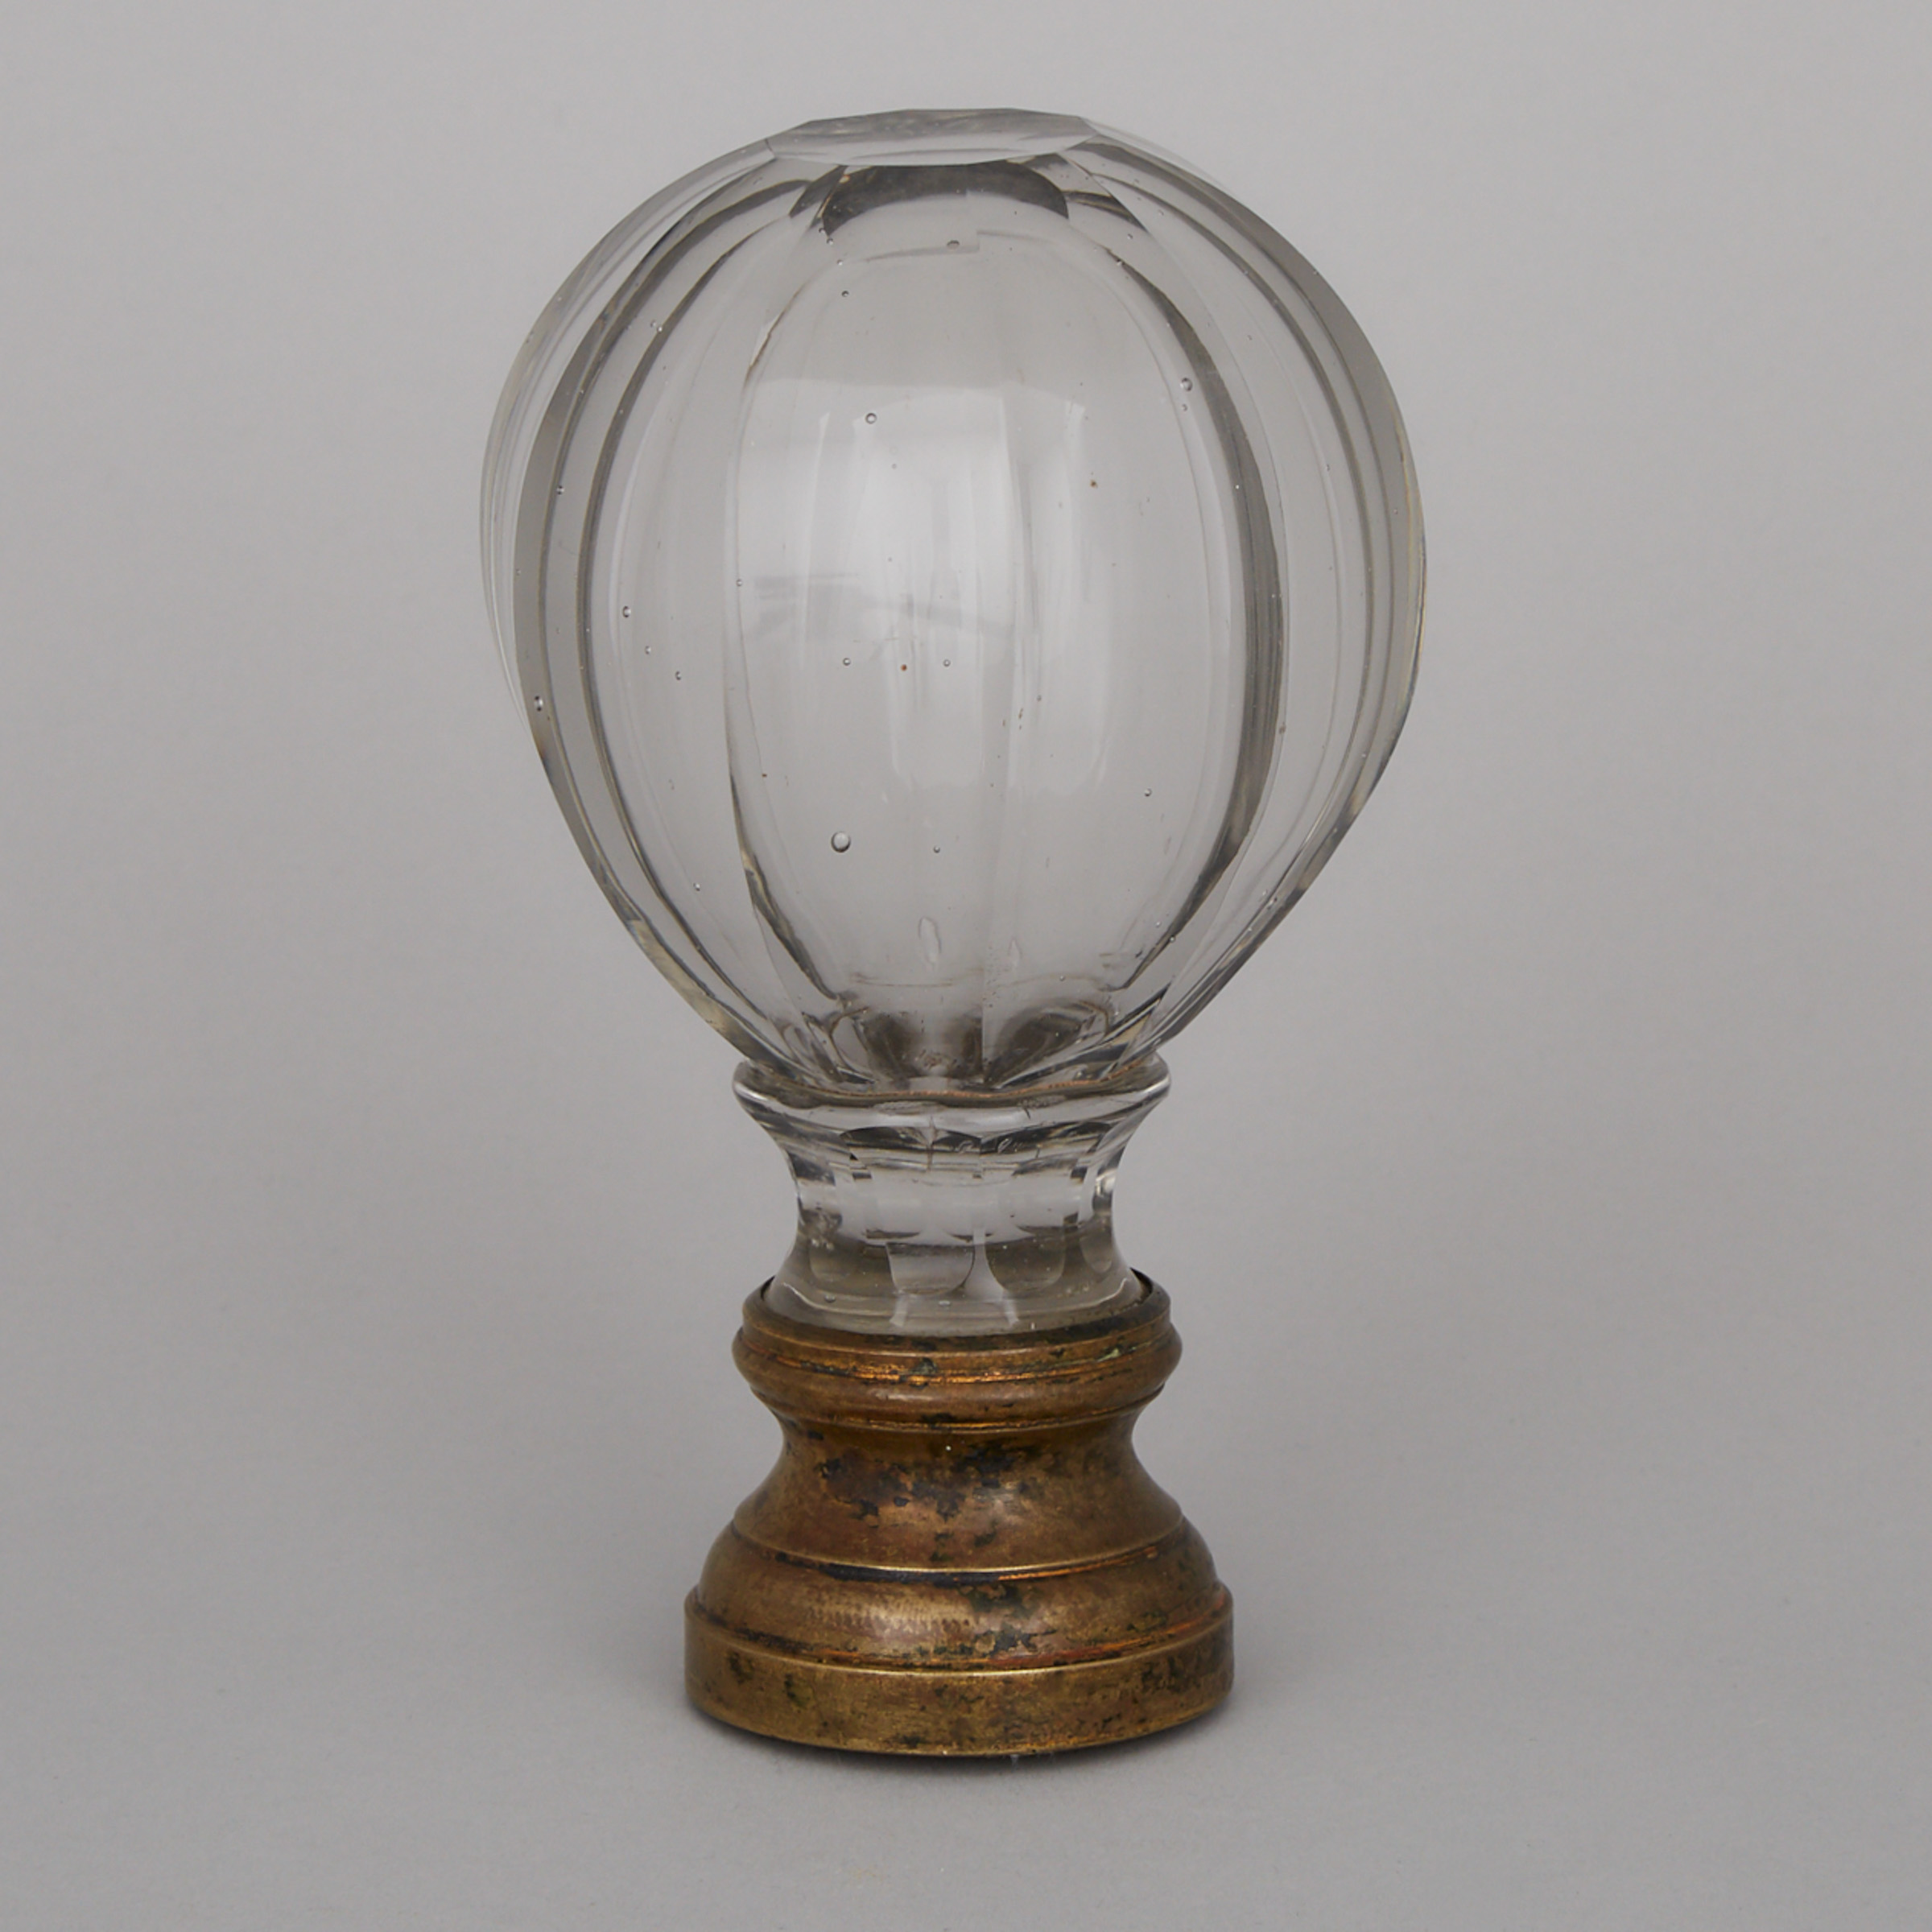 French Cut Glass Newel Post Finial, 19th century